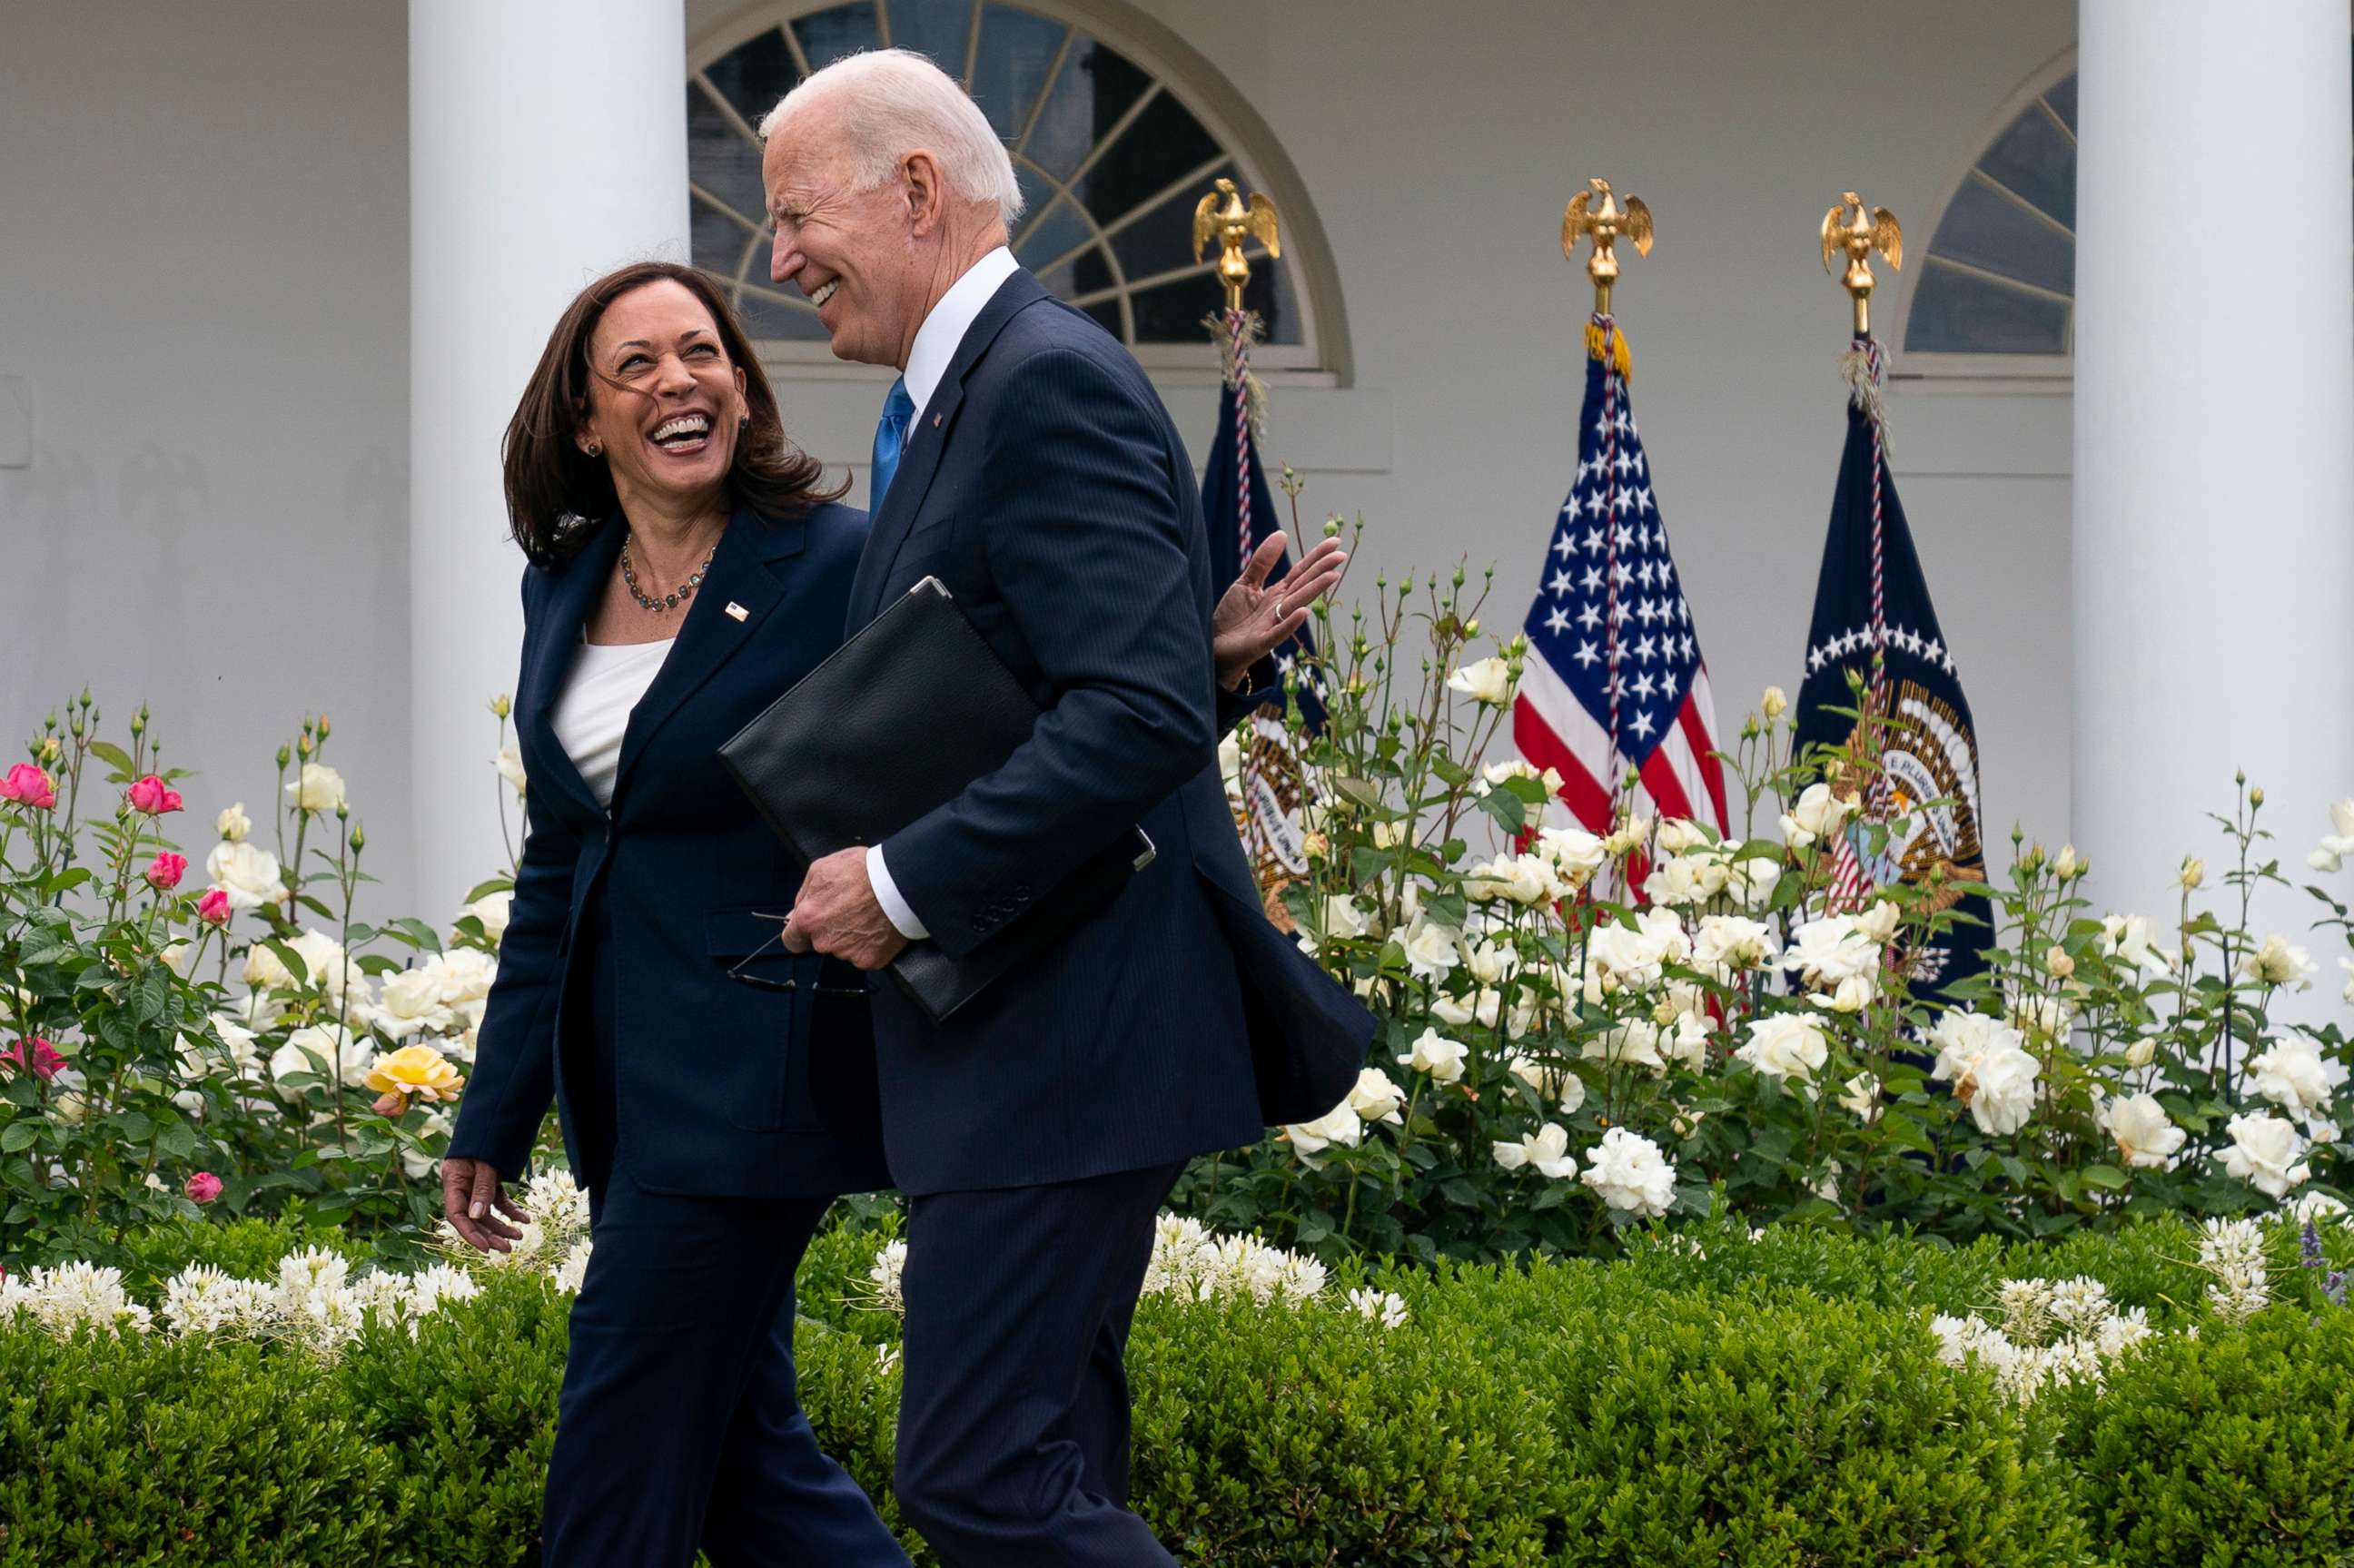 PHOTO: Vice President Kamala Harris and President Joe Biden smile and walk off after speaking about updated guidance on mask mandates, in the Rose Garden of the White House, May 13, 2021.